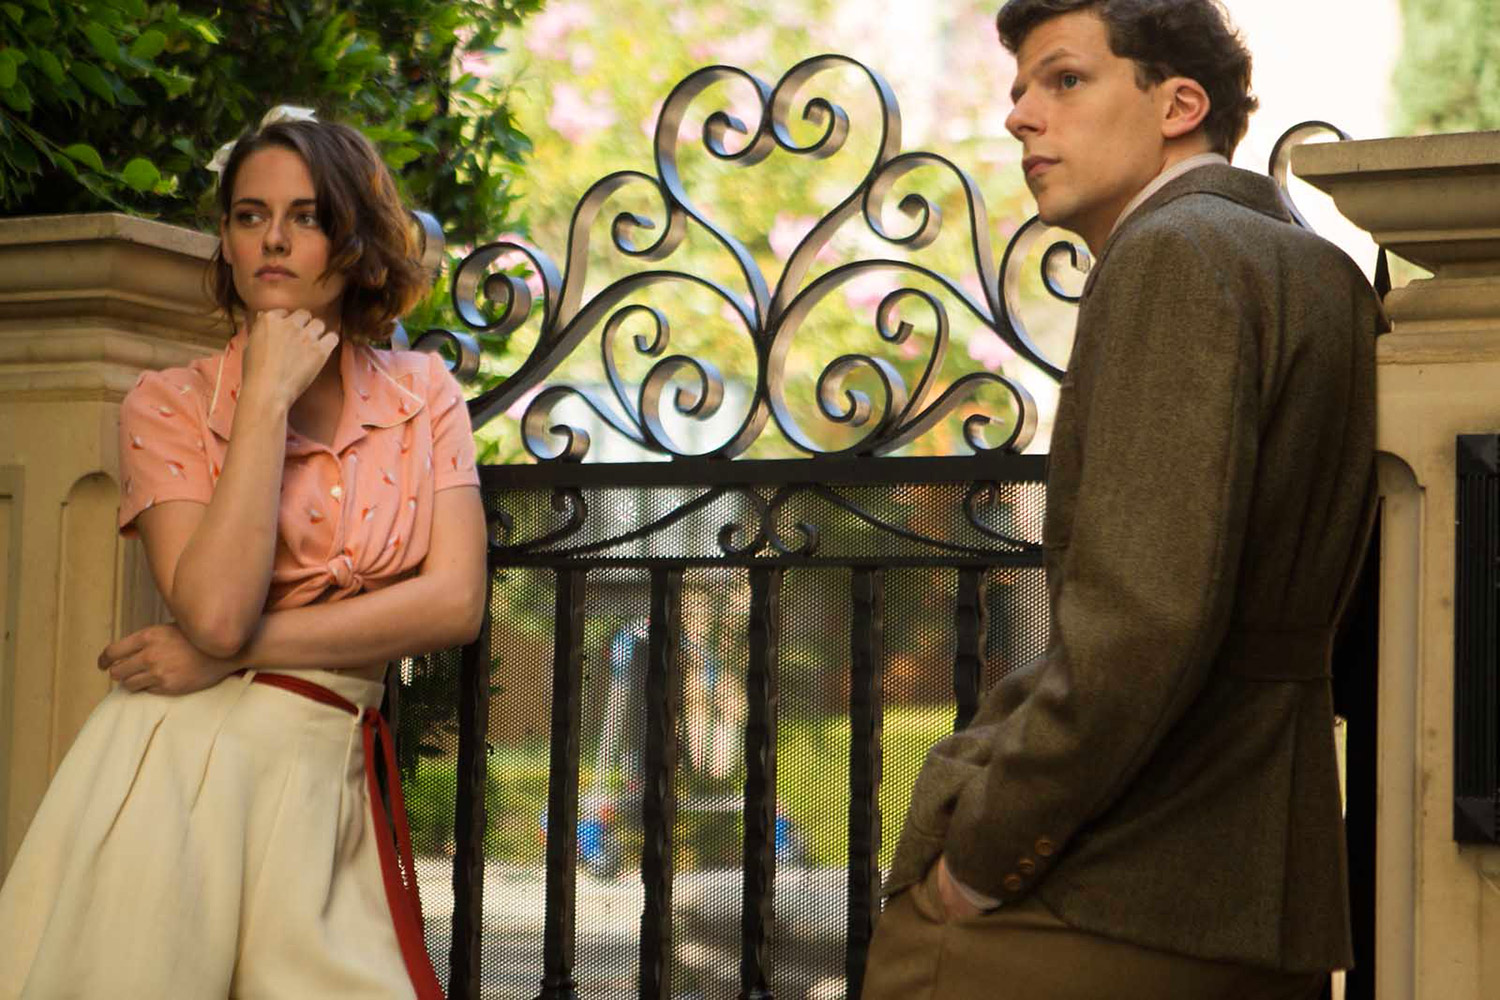 Videophiled: Woody Allen’s wistful ‘Café Society’ and John le Carré’s ‘Traitor’